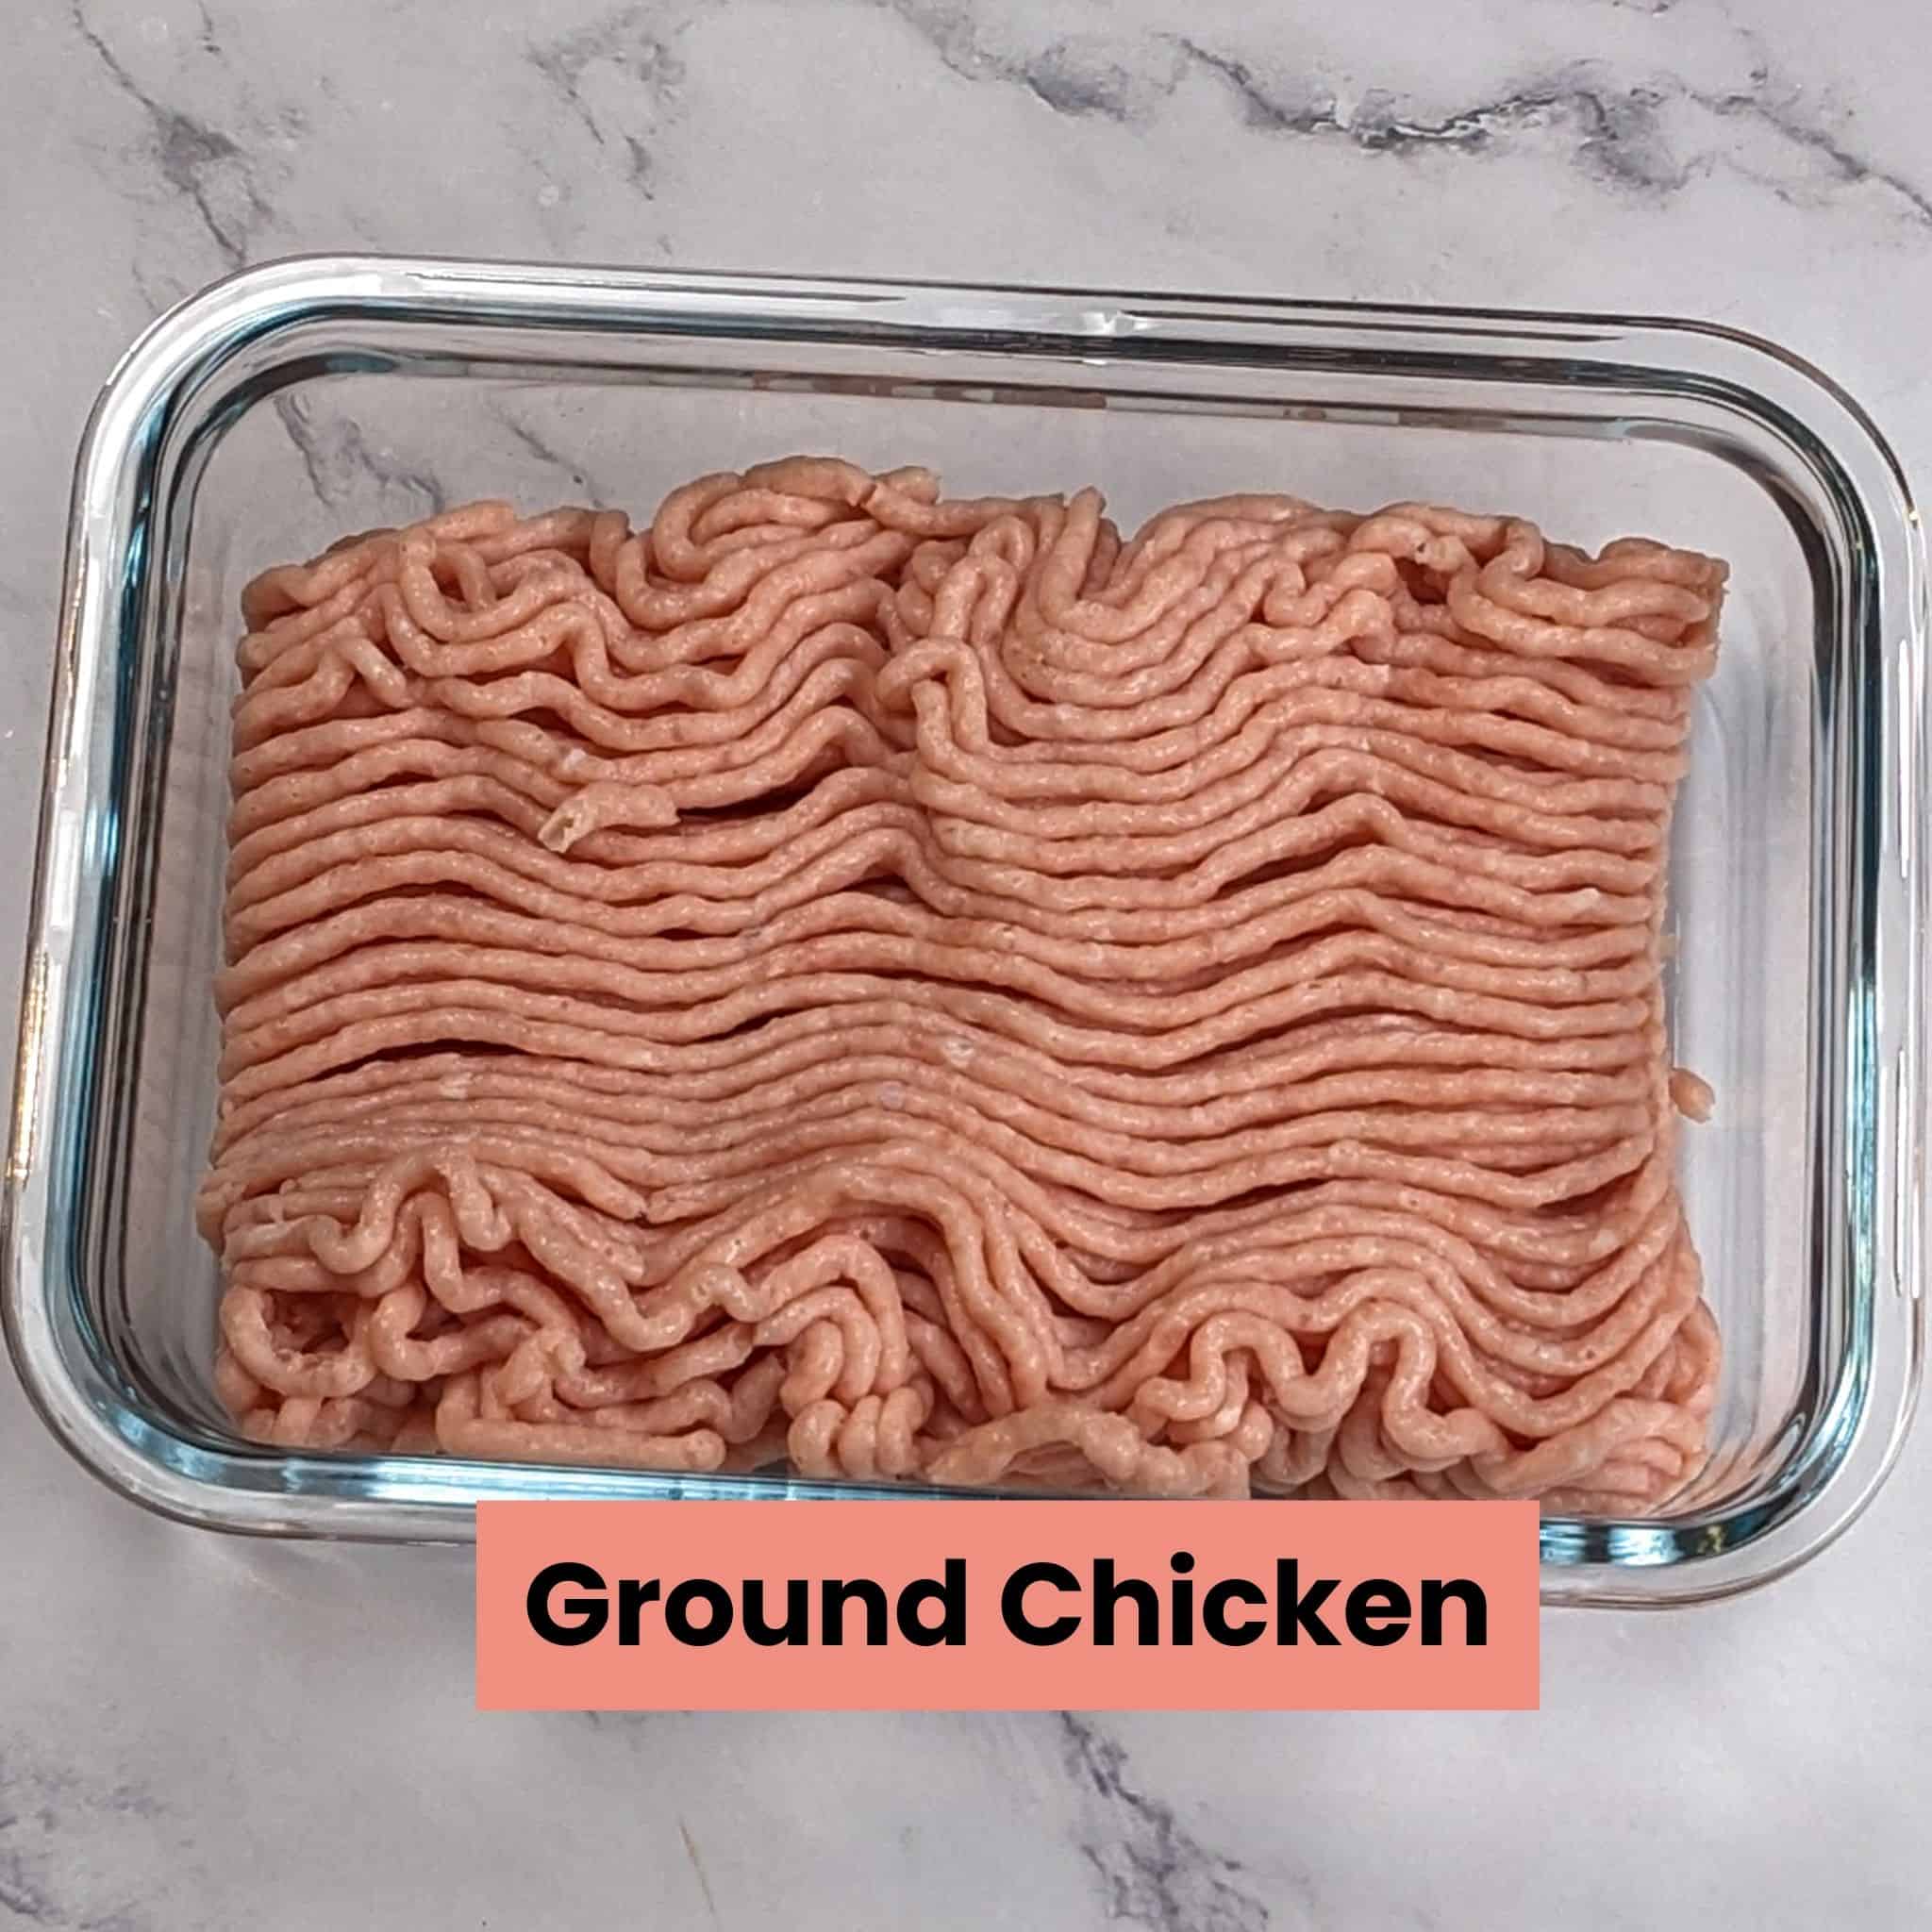 store bought ground chicken in a glass rectangle container